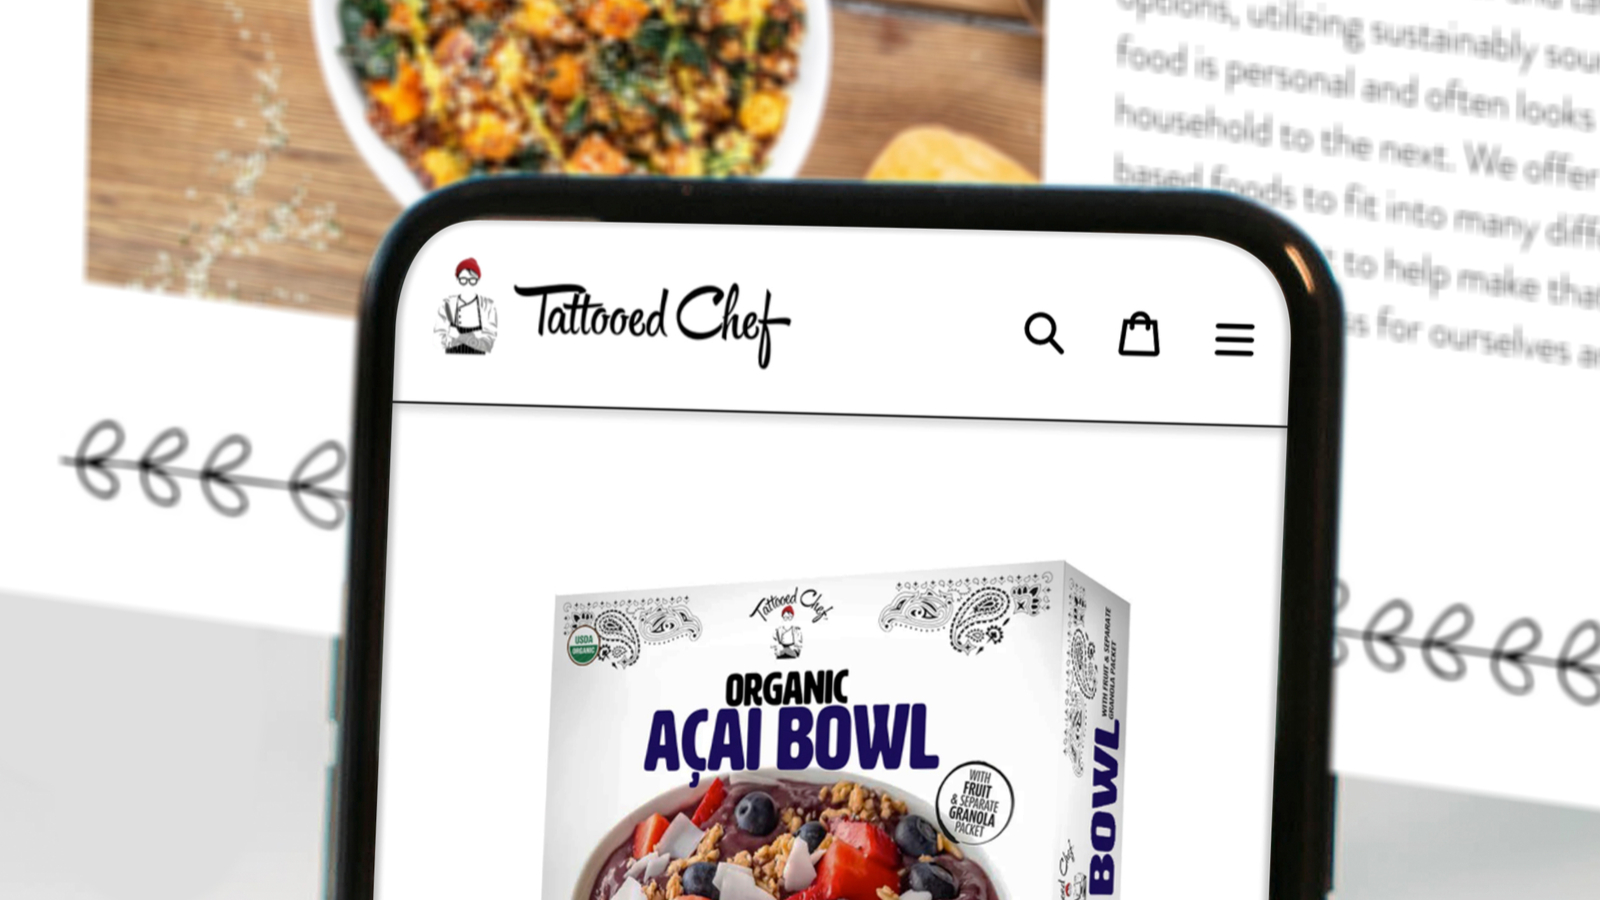 Information about a Tattooed Chef acai bowl is shown on a phone representing TTCF stock.